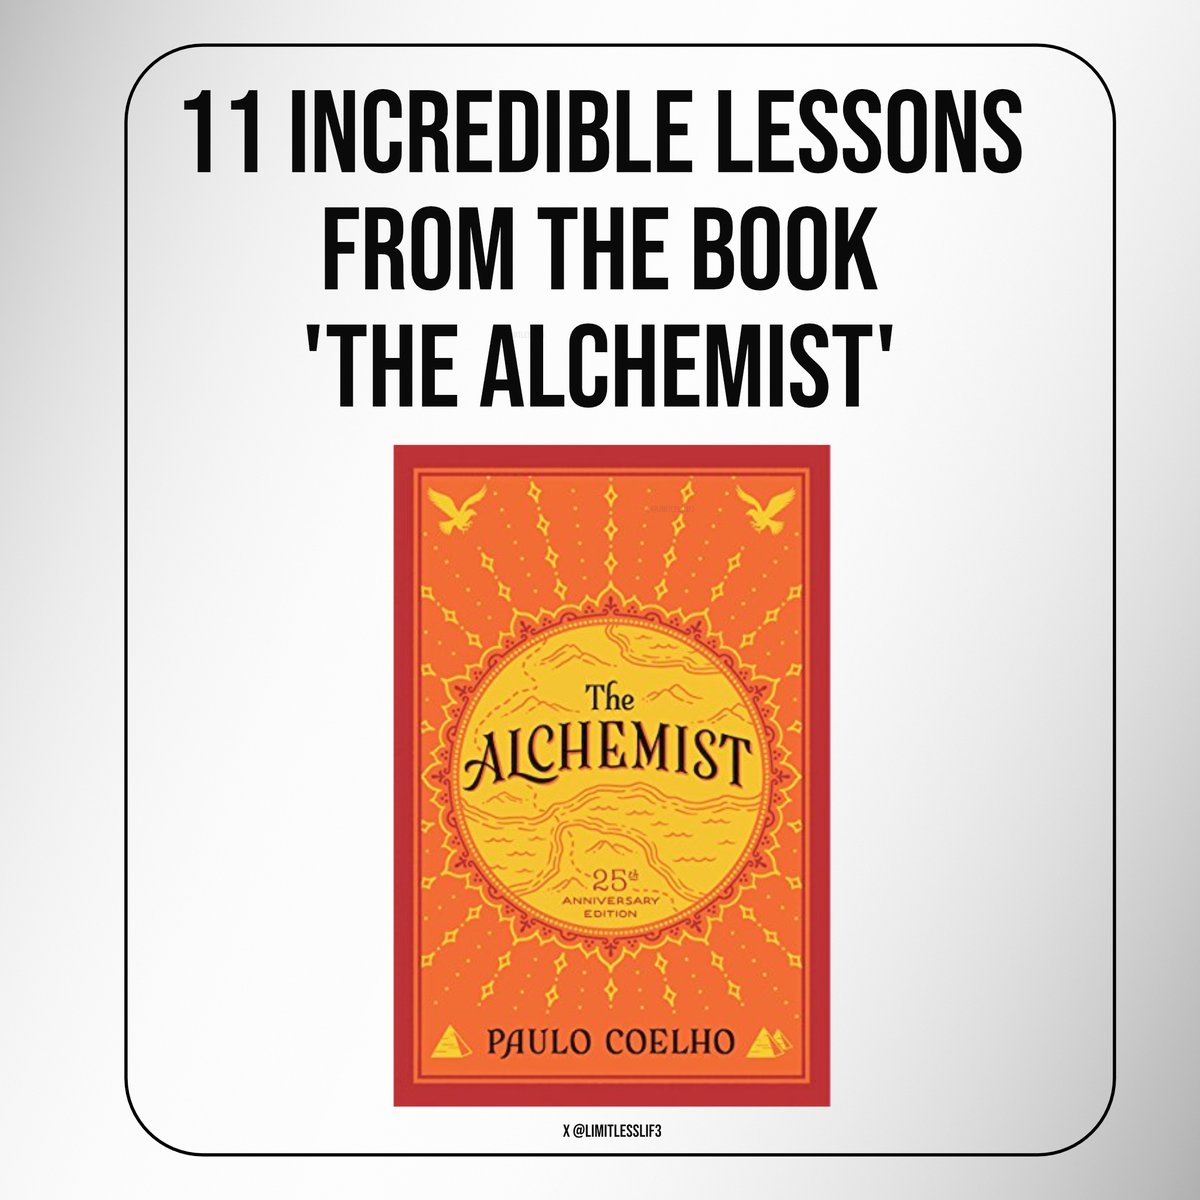 11 Incredible Lessons from the Book 'The Alchemist'